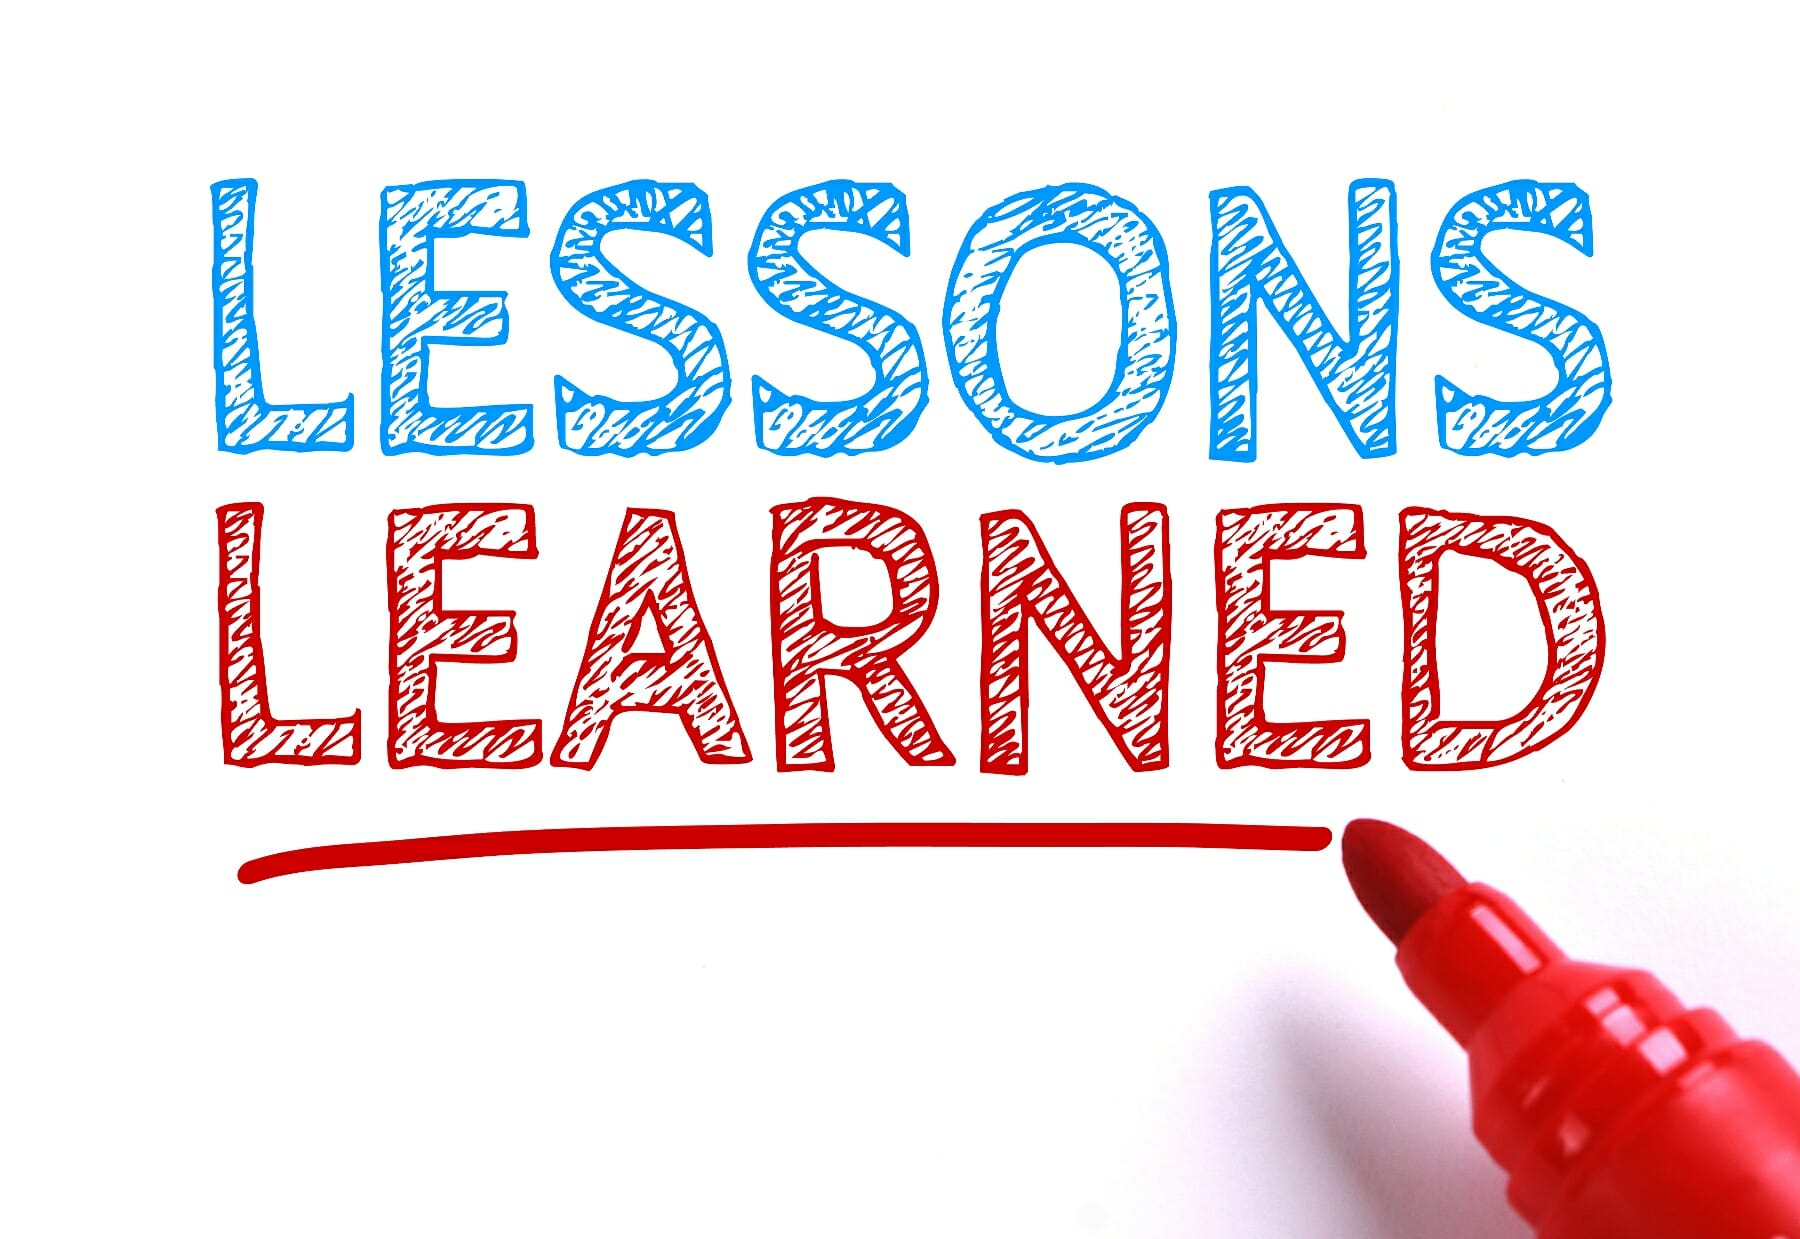 How to Apply lessons learned for Success in Projects